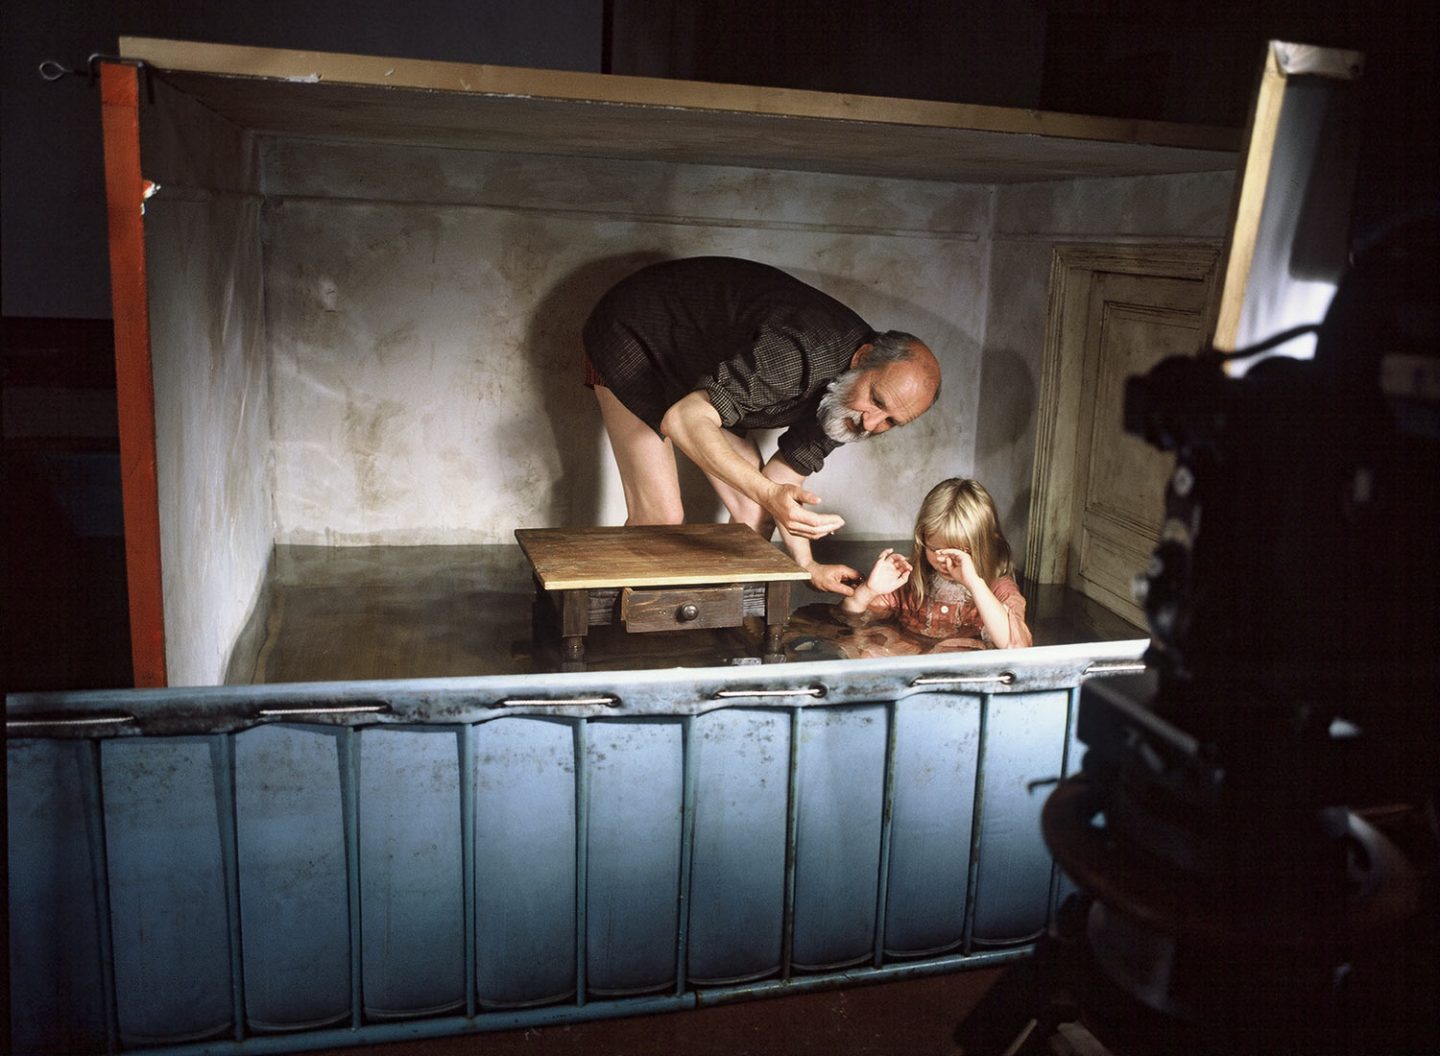 Behind the scenes of "Alice," Svankmajer's first feature film. Photo credit: Athanor.